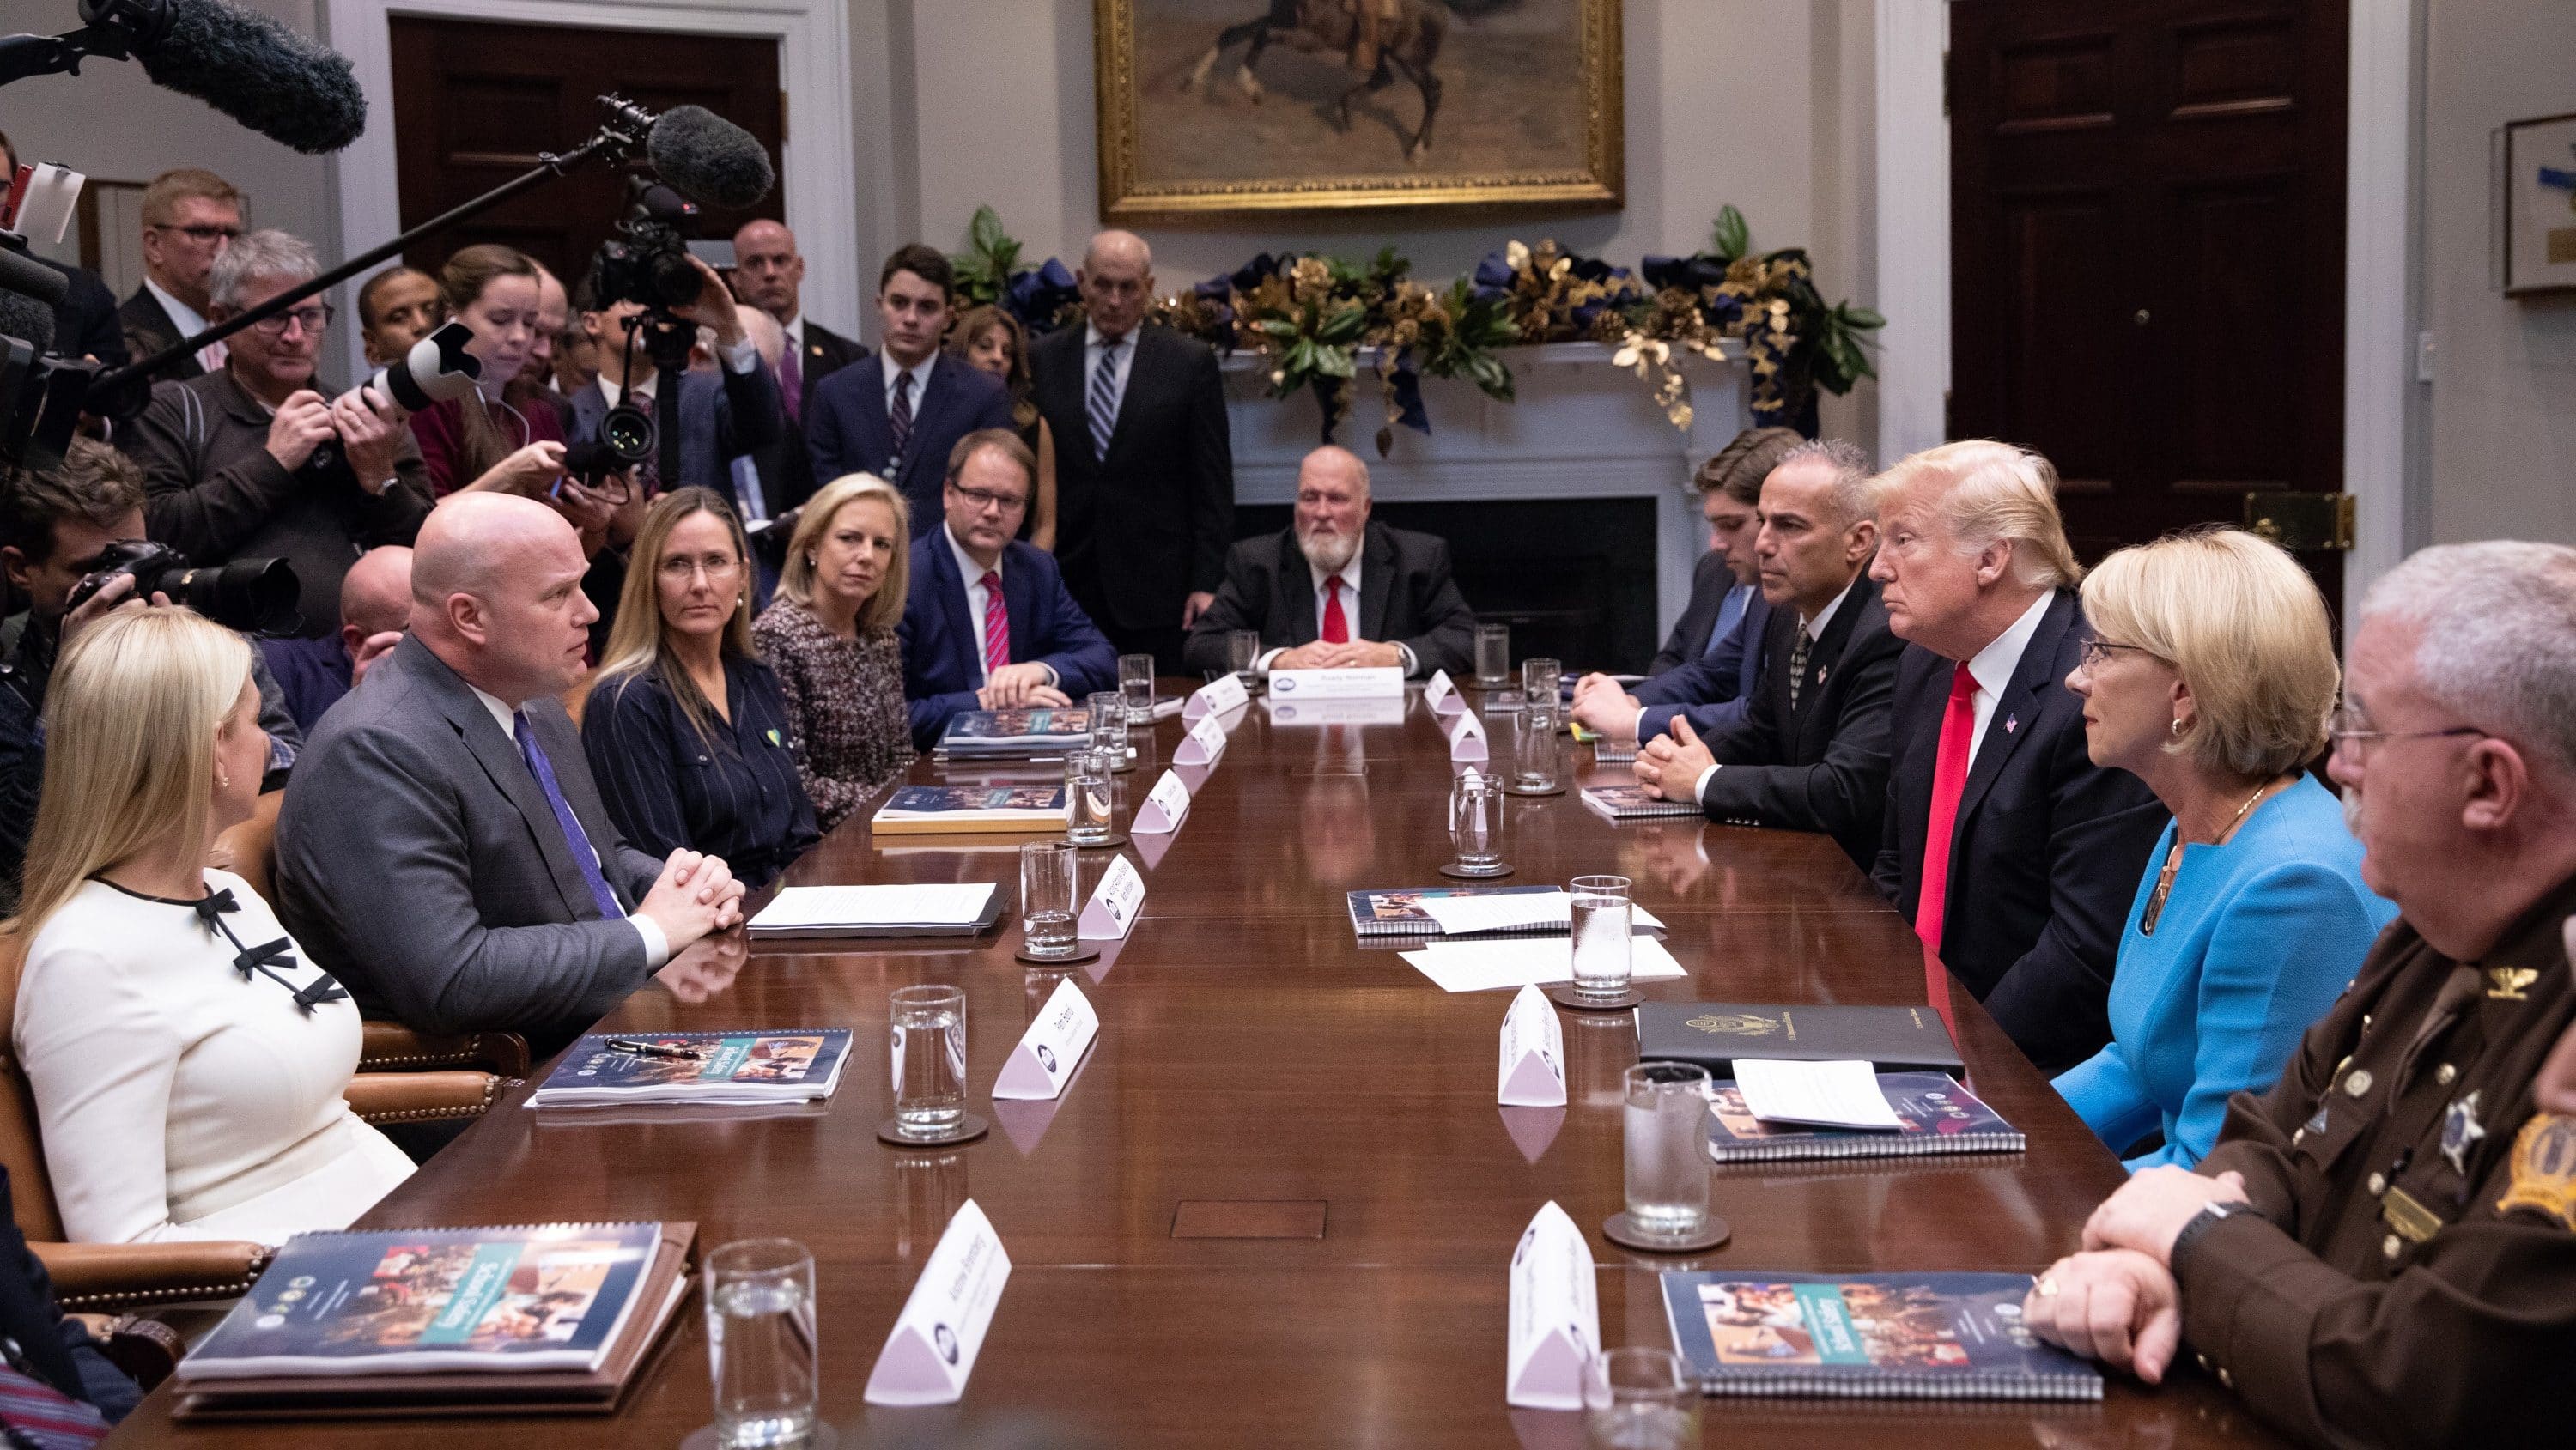 President Trump meet with members of his cabinet and families of victims of school violence.